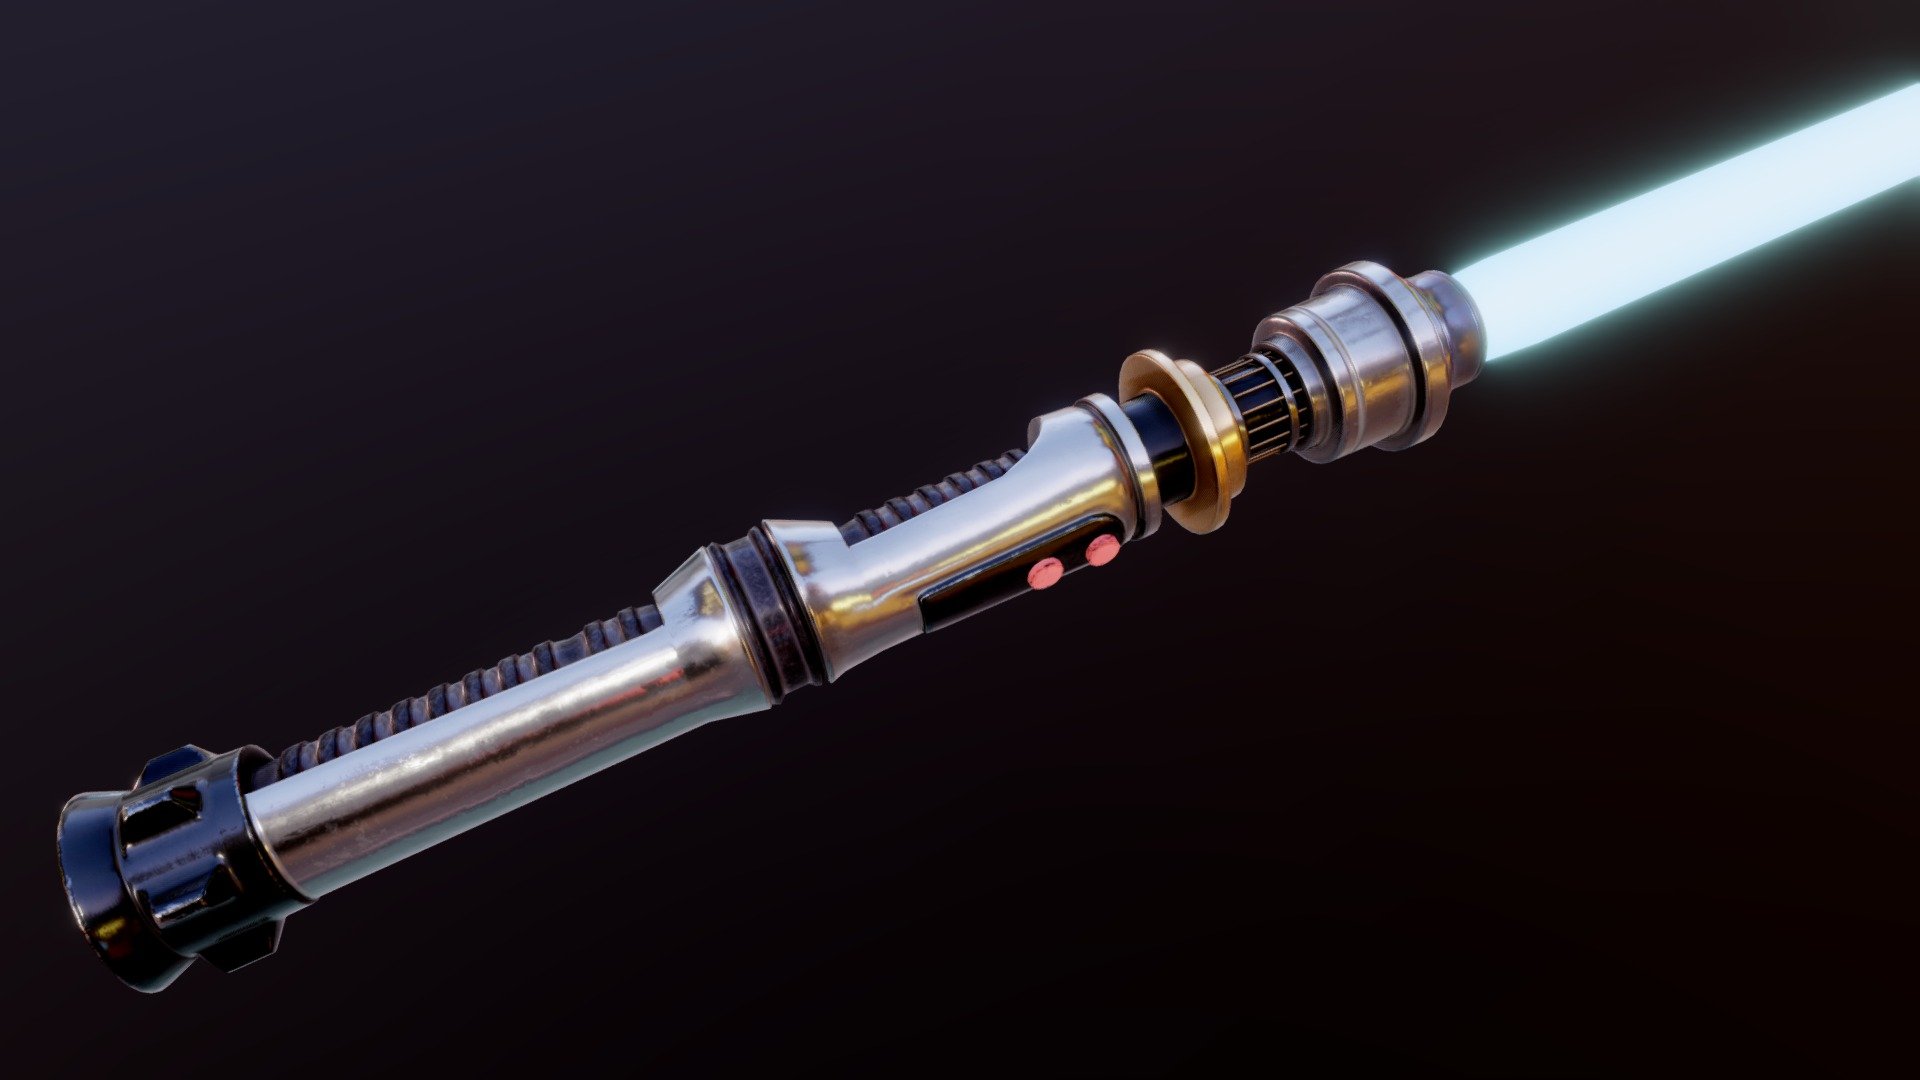 Kyle's lightsaber from Jedi Knight. Made in blender, textured and baked in substance painter. A bit more aged and scuffed version.  If you like downloading my models then consider suporting me on patreon https://www.patreon.com/Nul_Del

lightsaber hum https://www.youtube.com/watch?v=RnWulFX7aww - Kyle Katarn's lightsaber low poly textured - Download Free 3D model by Al (@lightningocelot) 3d model